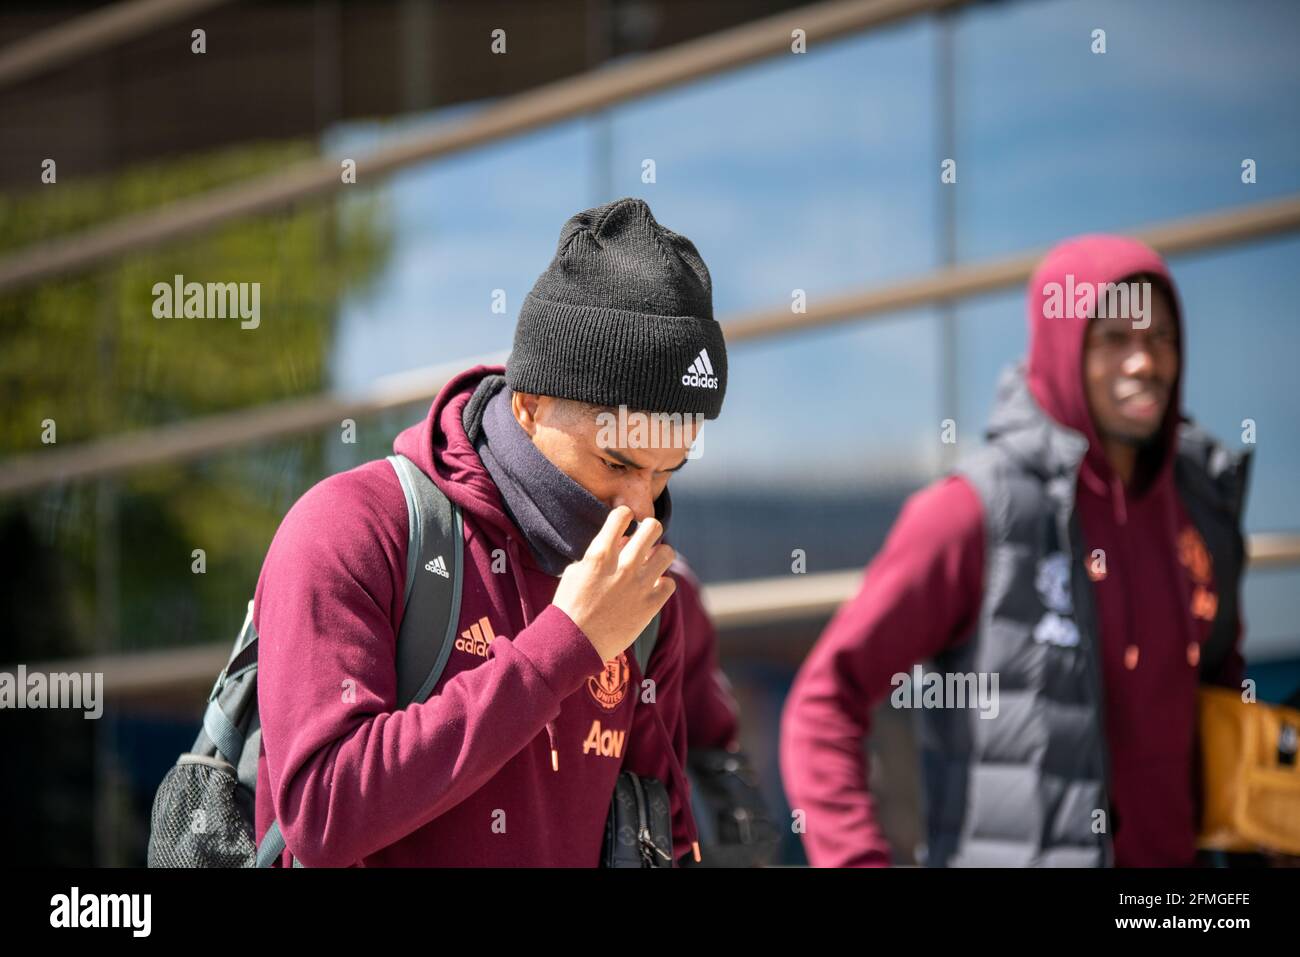 Birmingham, UK. May 9th 2021: Close-up of Marcus Rashford with Pogba in the background, adjusting his face covering as he heads out a hotel for a match against Aston Villa in Birmingham. Credit: Ryan Underwood/Alamy Live News Stock Photo